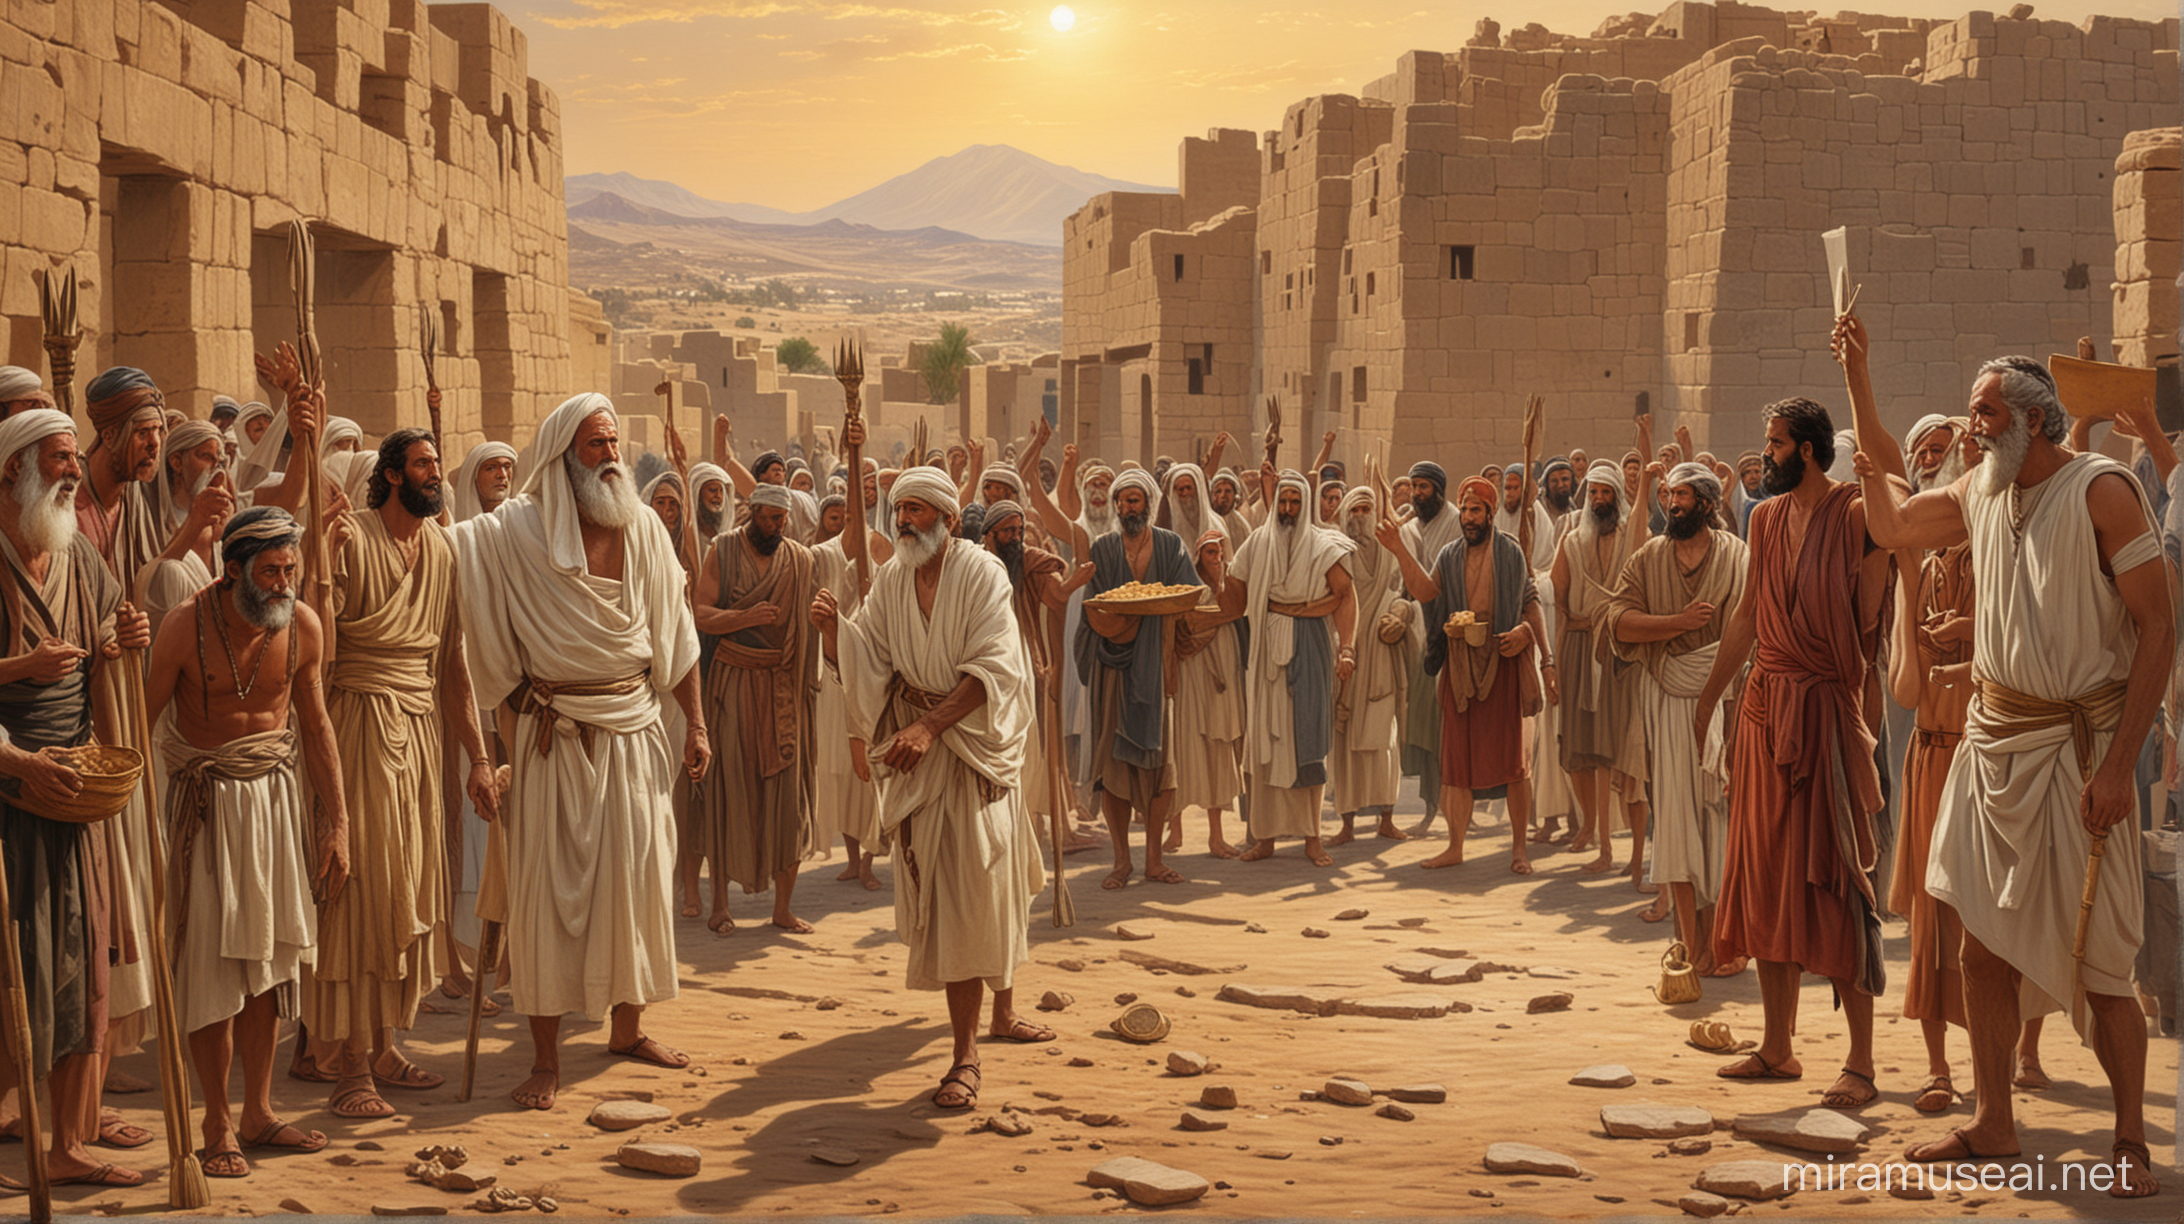 The feast of the Passover in moses era